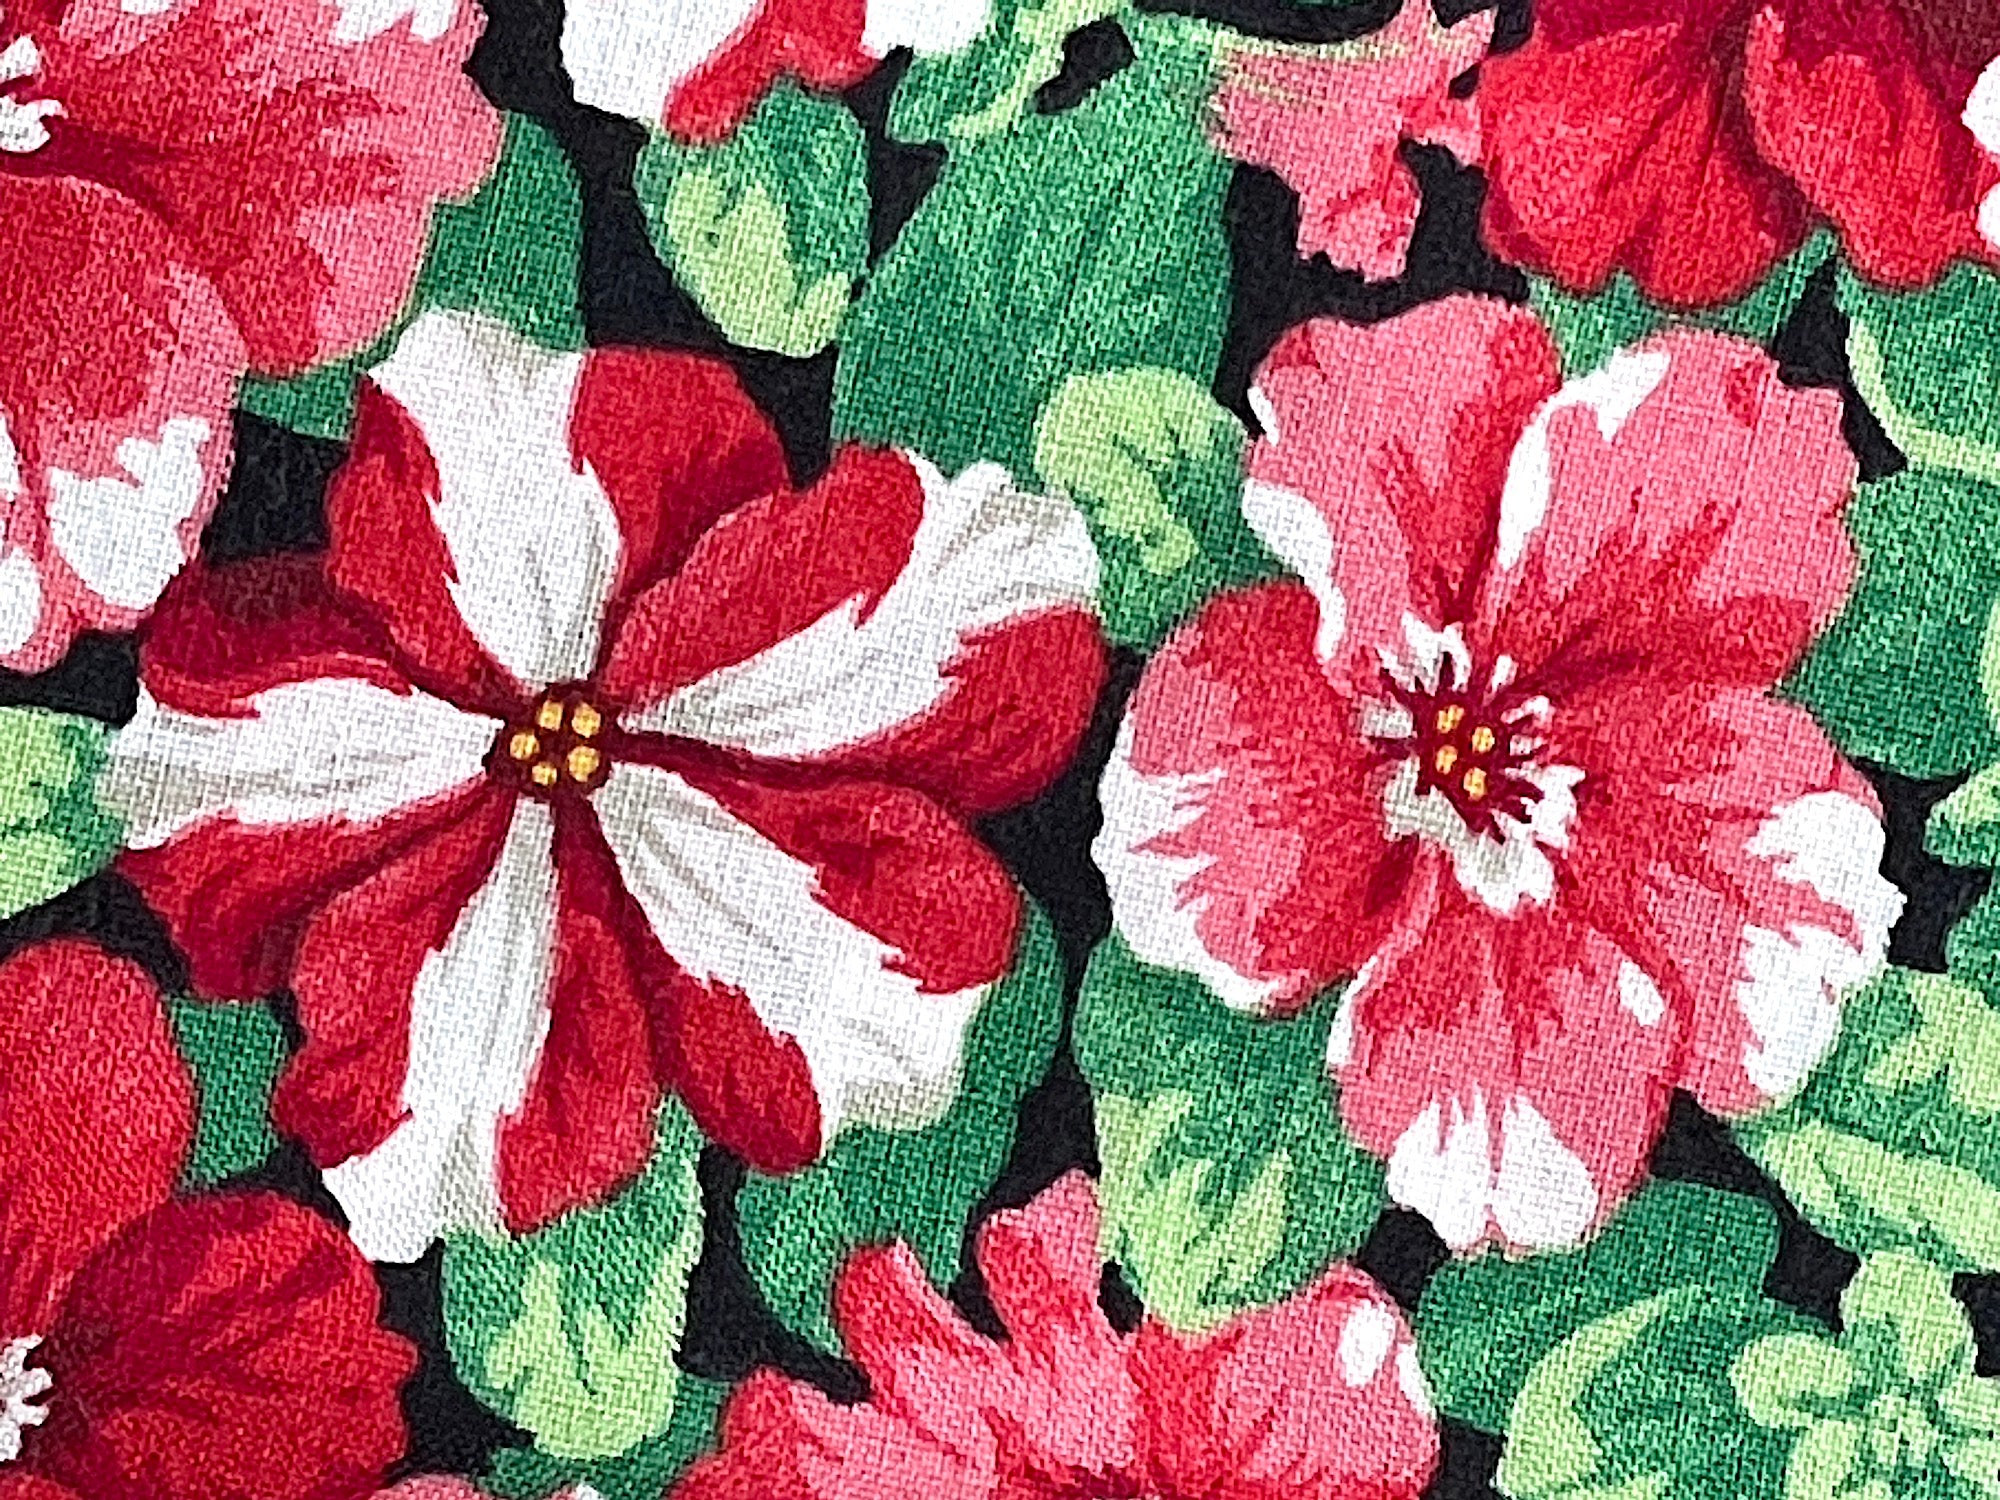 Closeup of red and white striped petunia with a pink petunia